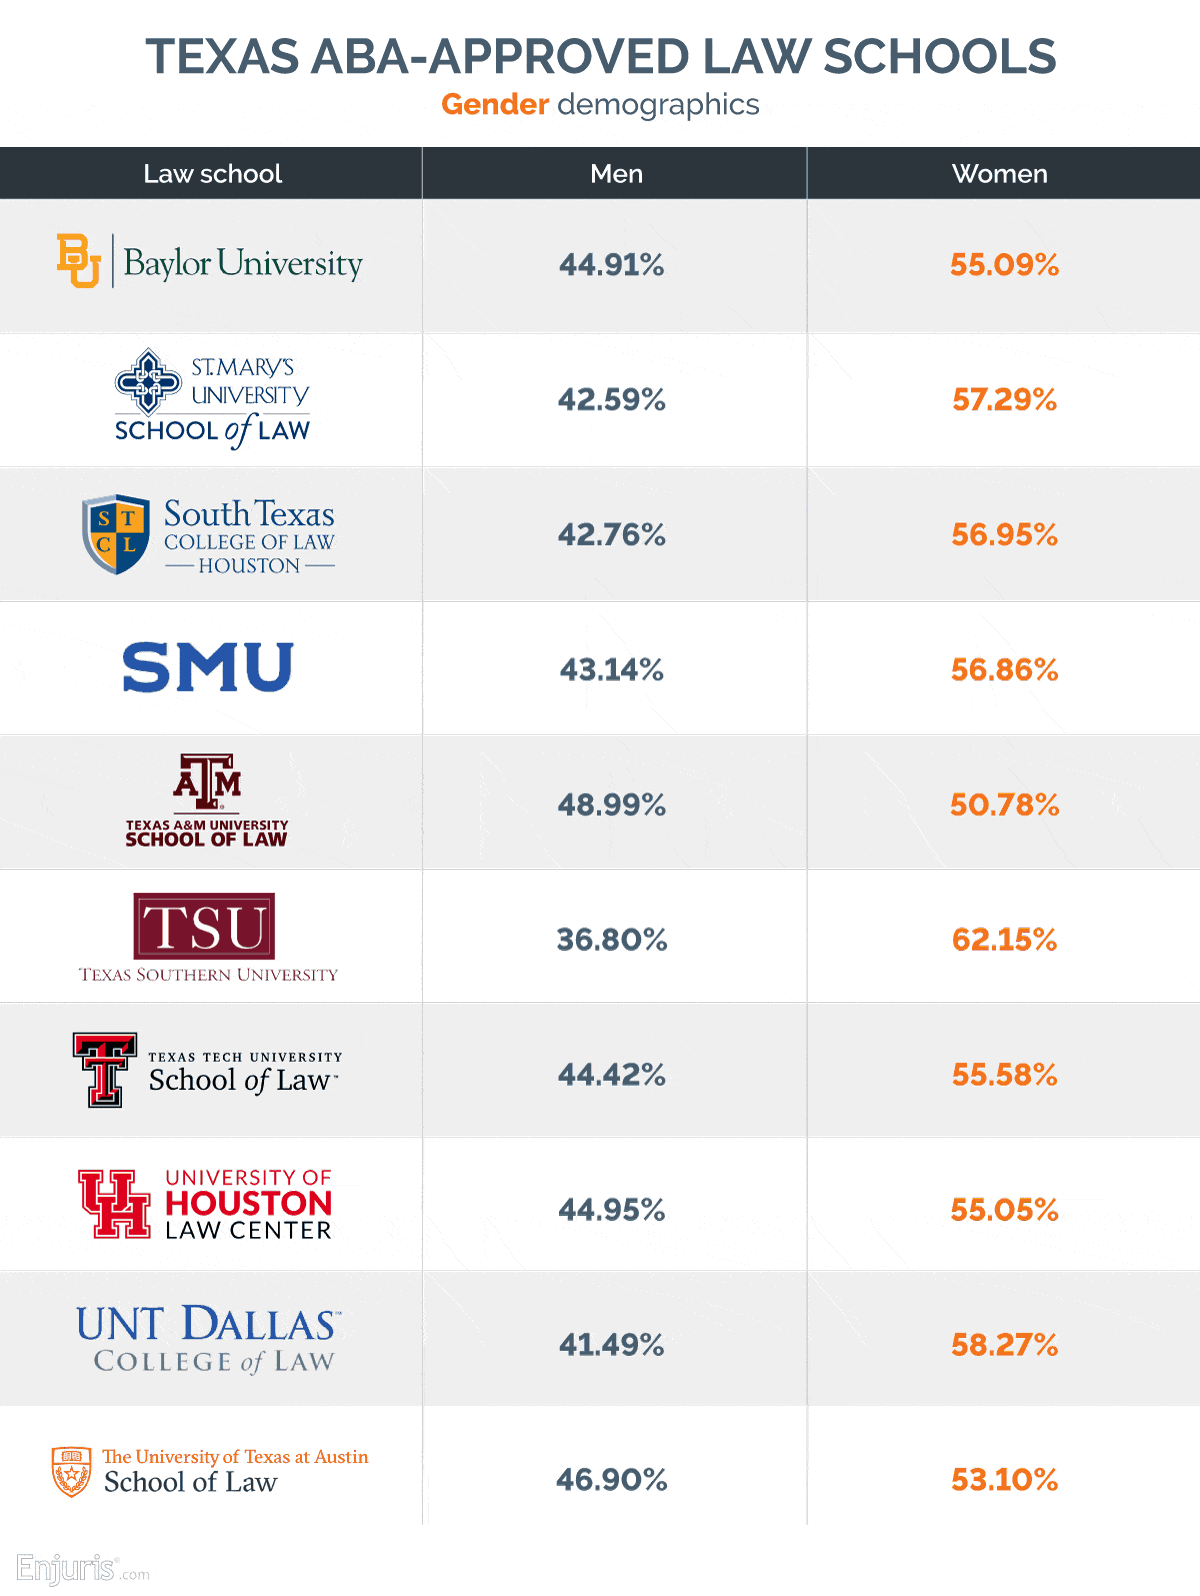 Texas ABA-approved law schools by gender demographics